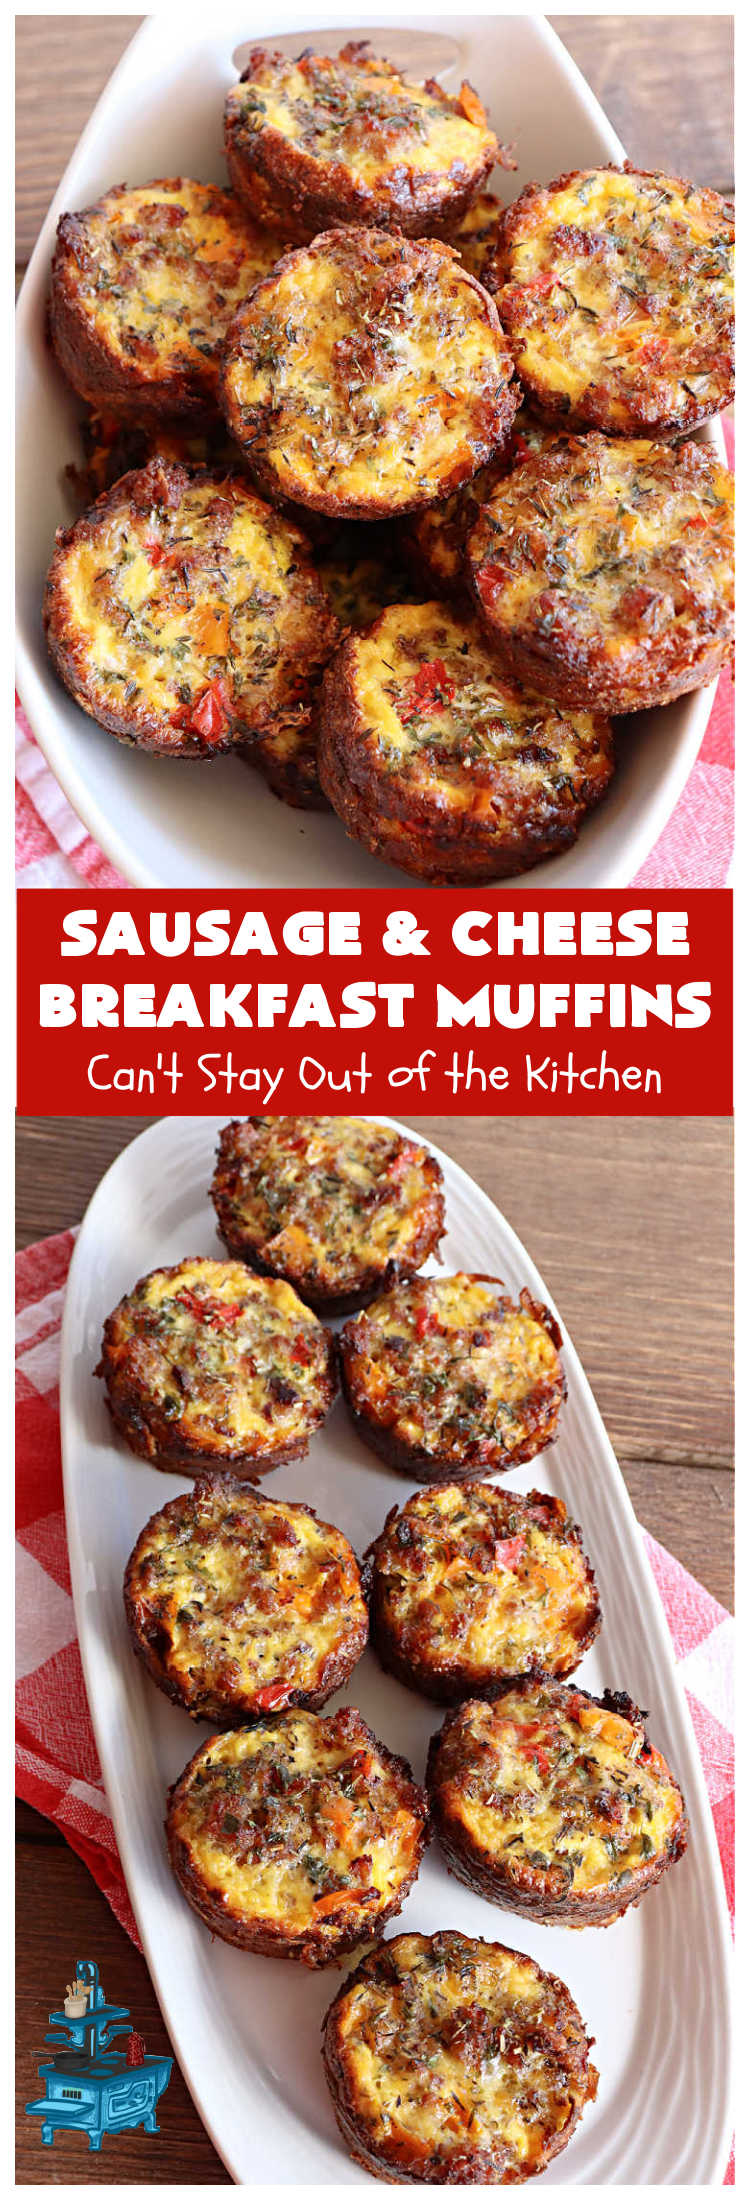 Sausage and Cheese Breakfast Muffins | Can't Stay Out of the Kitchen | these fabulous #BreakfastMuffins include #sausage, #CheddarCheese & #eggs in a cheesy #HashBrown crust. The #muffins are seasoned delightfully & one of the best #breakfast options you'll ever find. Great reheated & can be frozen. #pork #HolidayBreakfast #SausageAndCheeseBreakfastMuffins